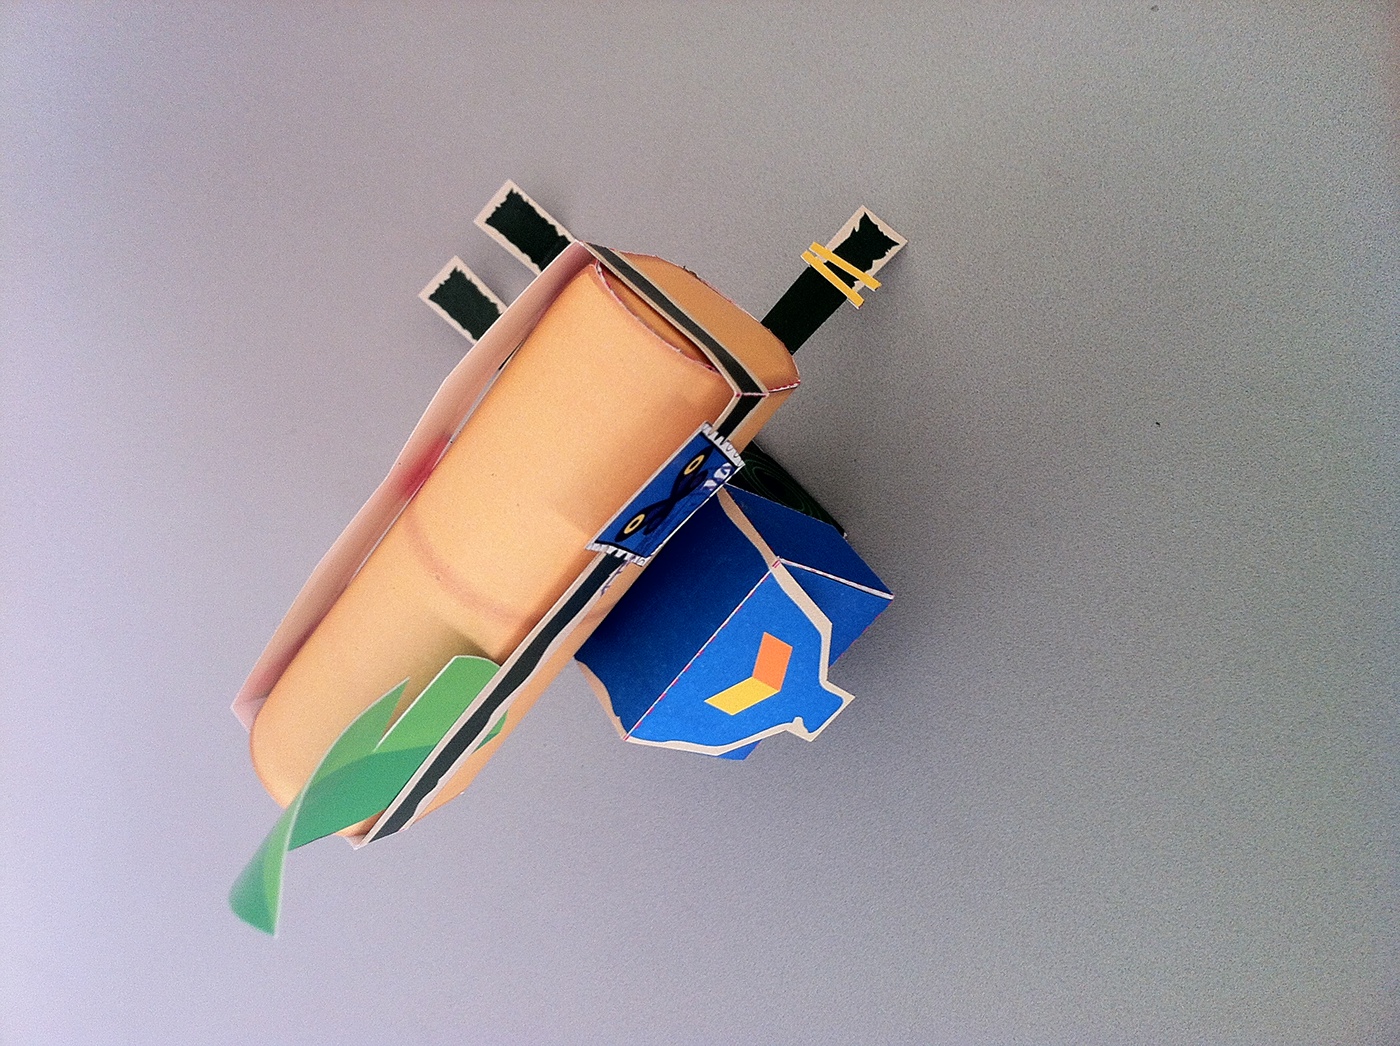 paper-craft paper-toy toy paper papercraft tearaway ikarusmedia iota Atoi